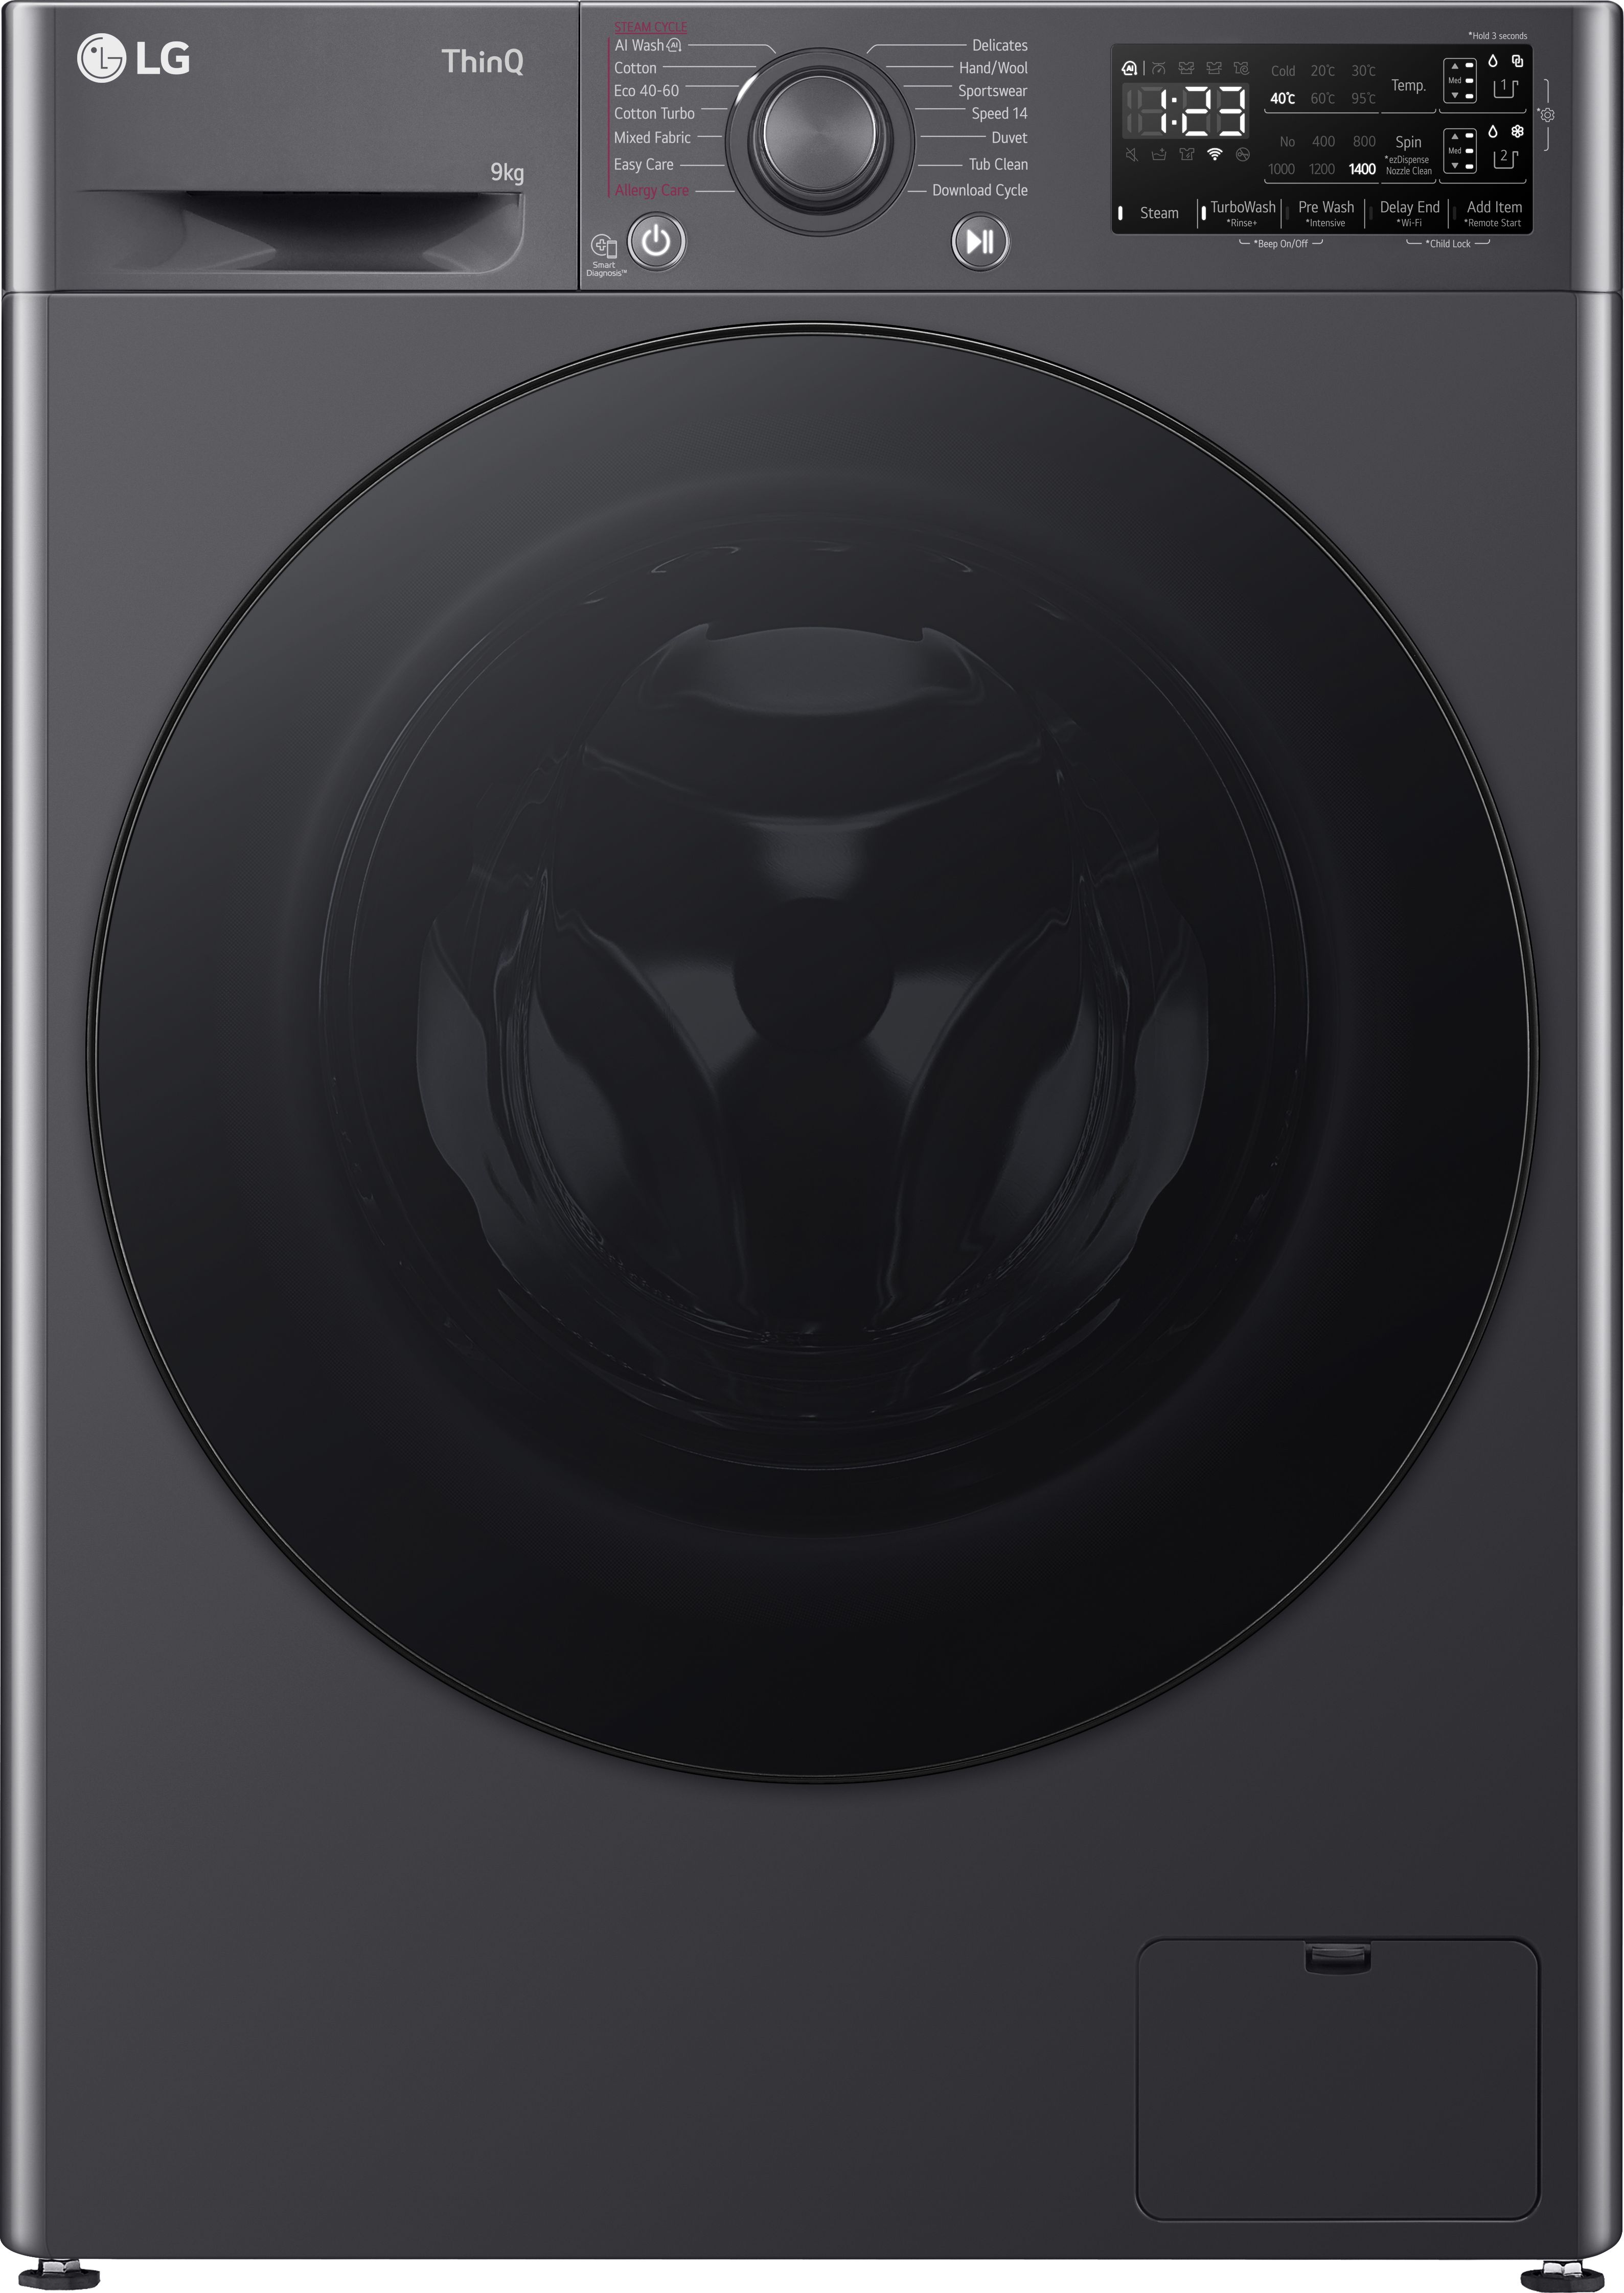 LG EZDispense F4Y509GBLA1 9kg WiFi Connected Washing Machine with 1400 rpm - Slate Grey - A Rated, Slate Grey